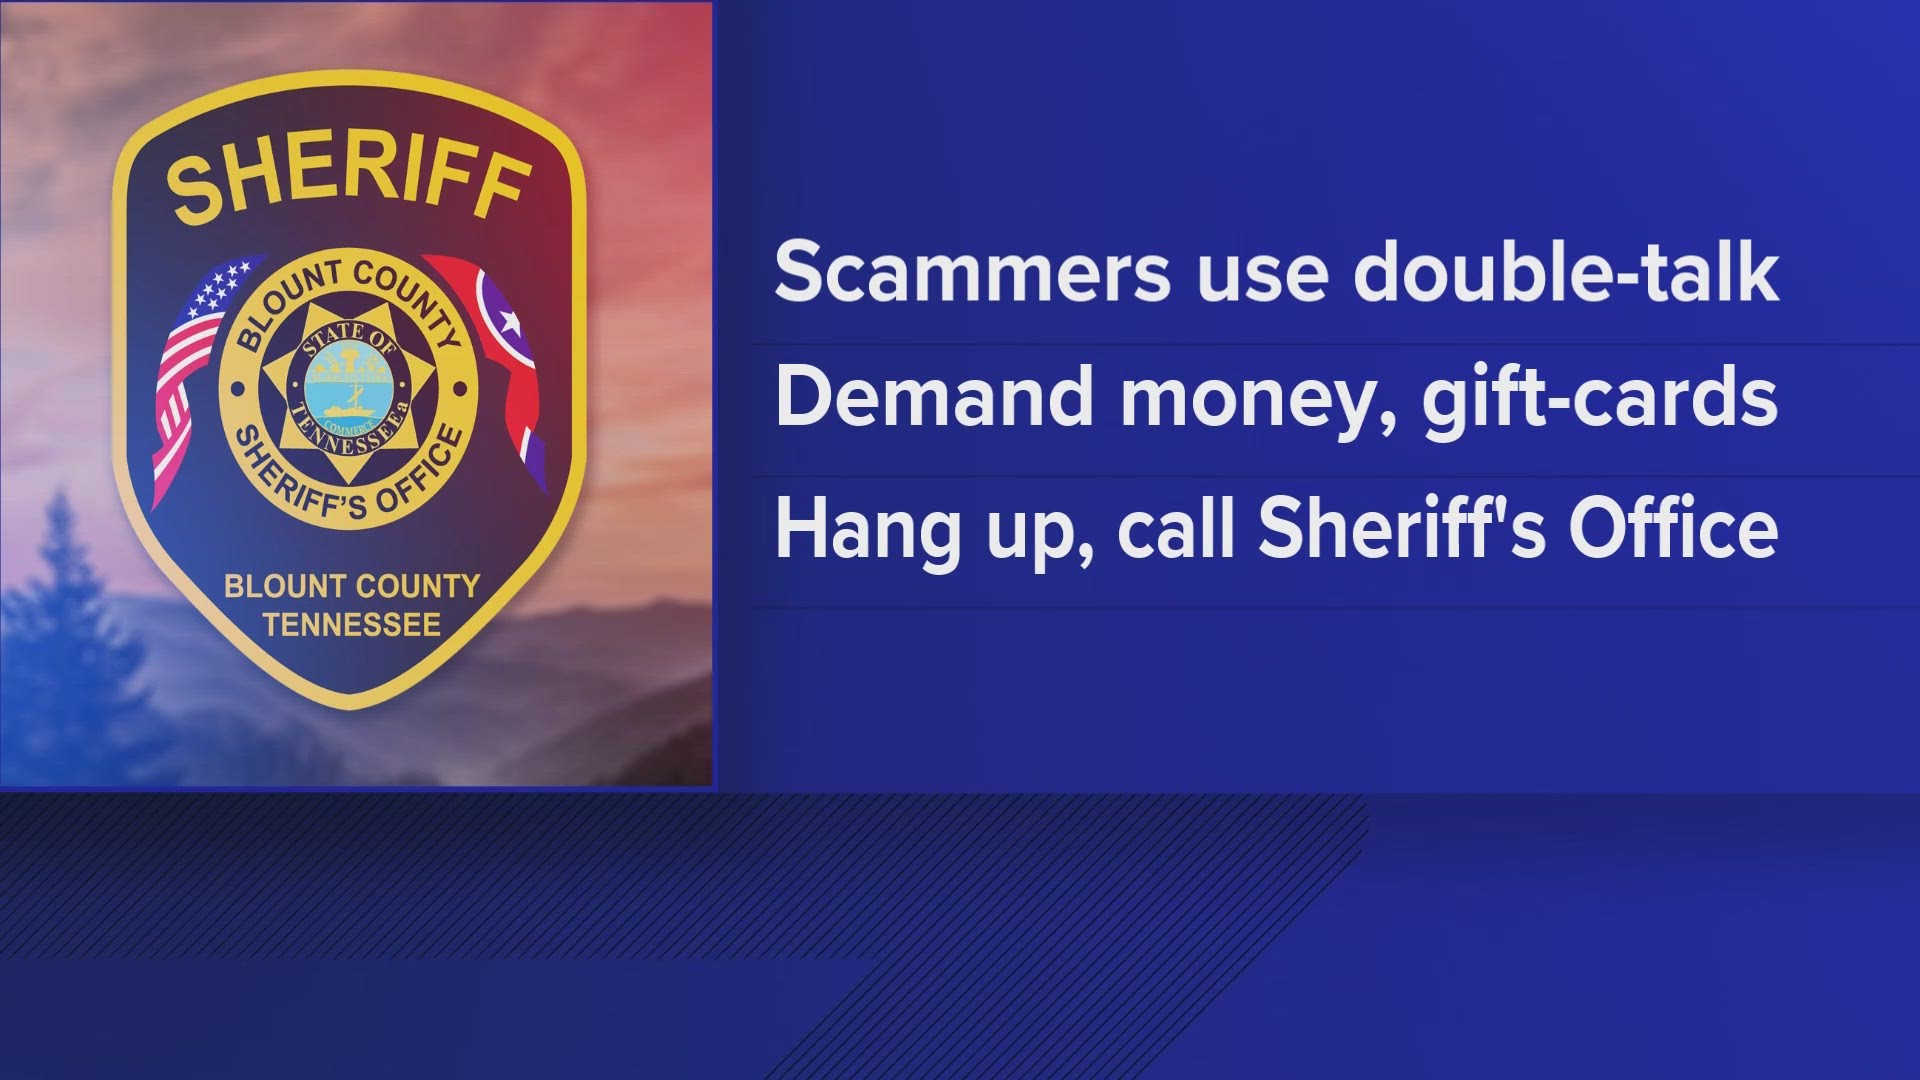 BCSO said the call is usually about jury duty or unpaid fines and tries to get victims to pay money to the scammer.